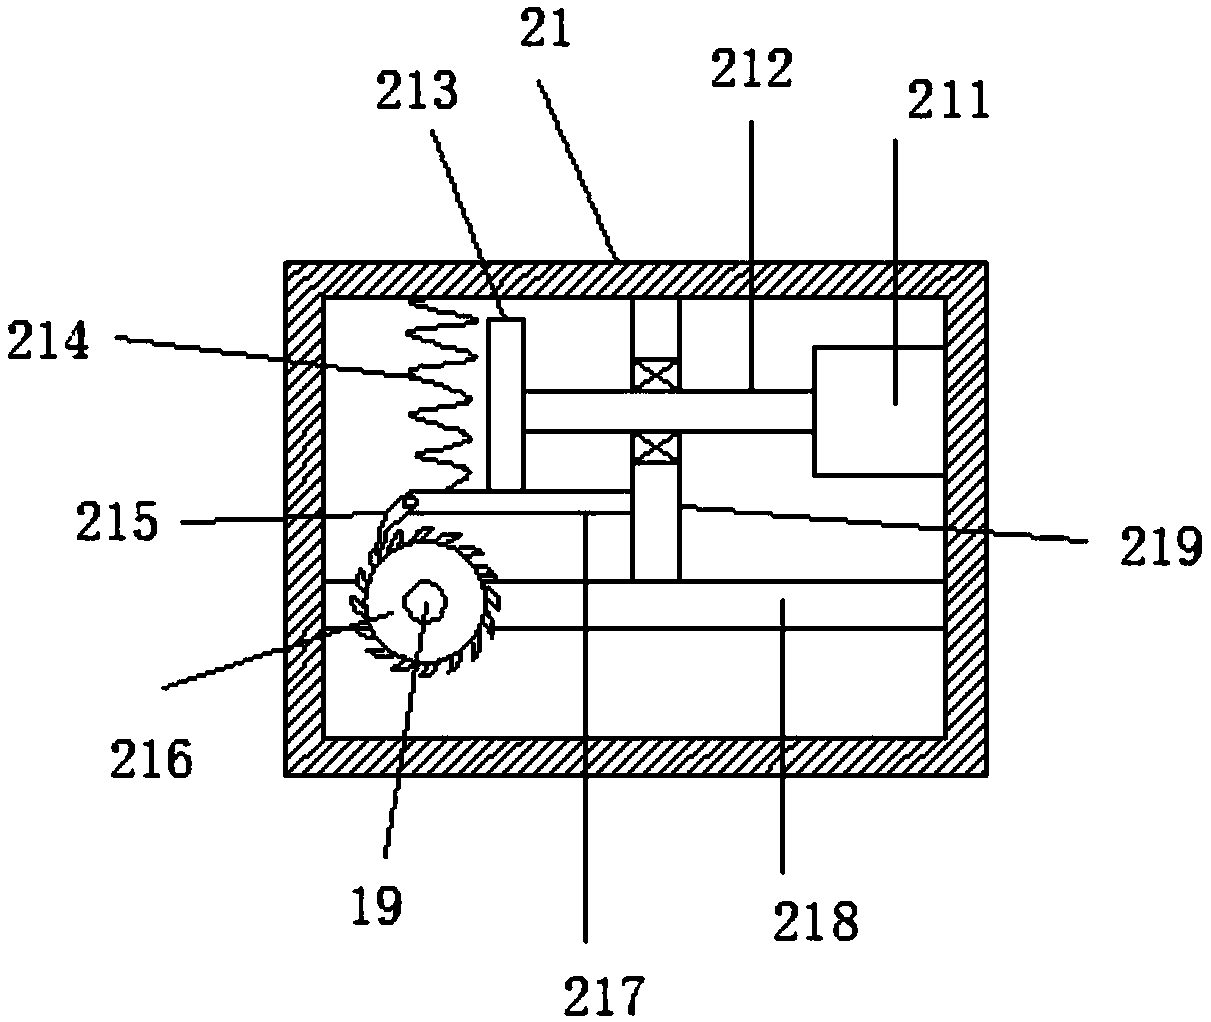 Self walking type quantitative equal-distance seeding device for agricultural production